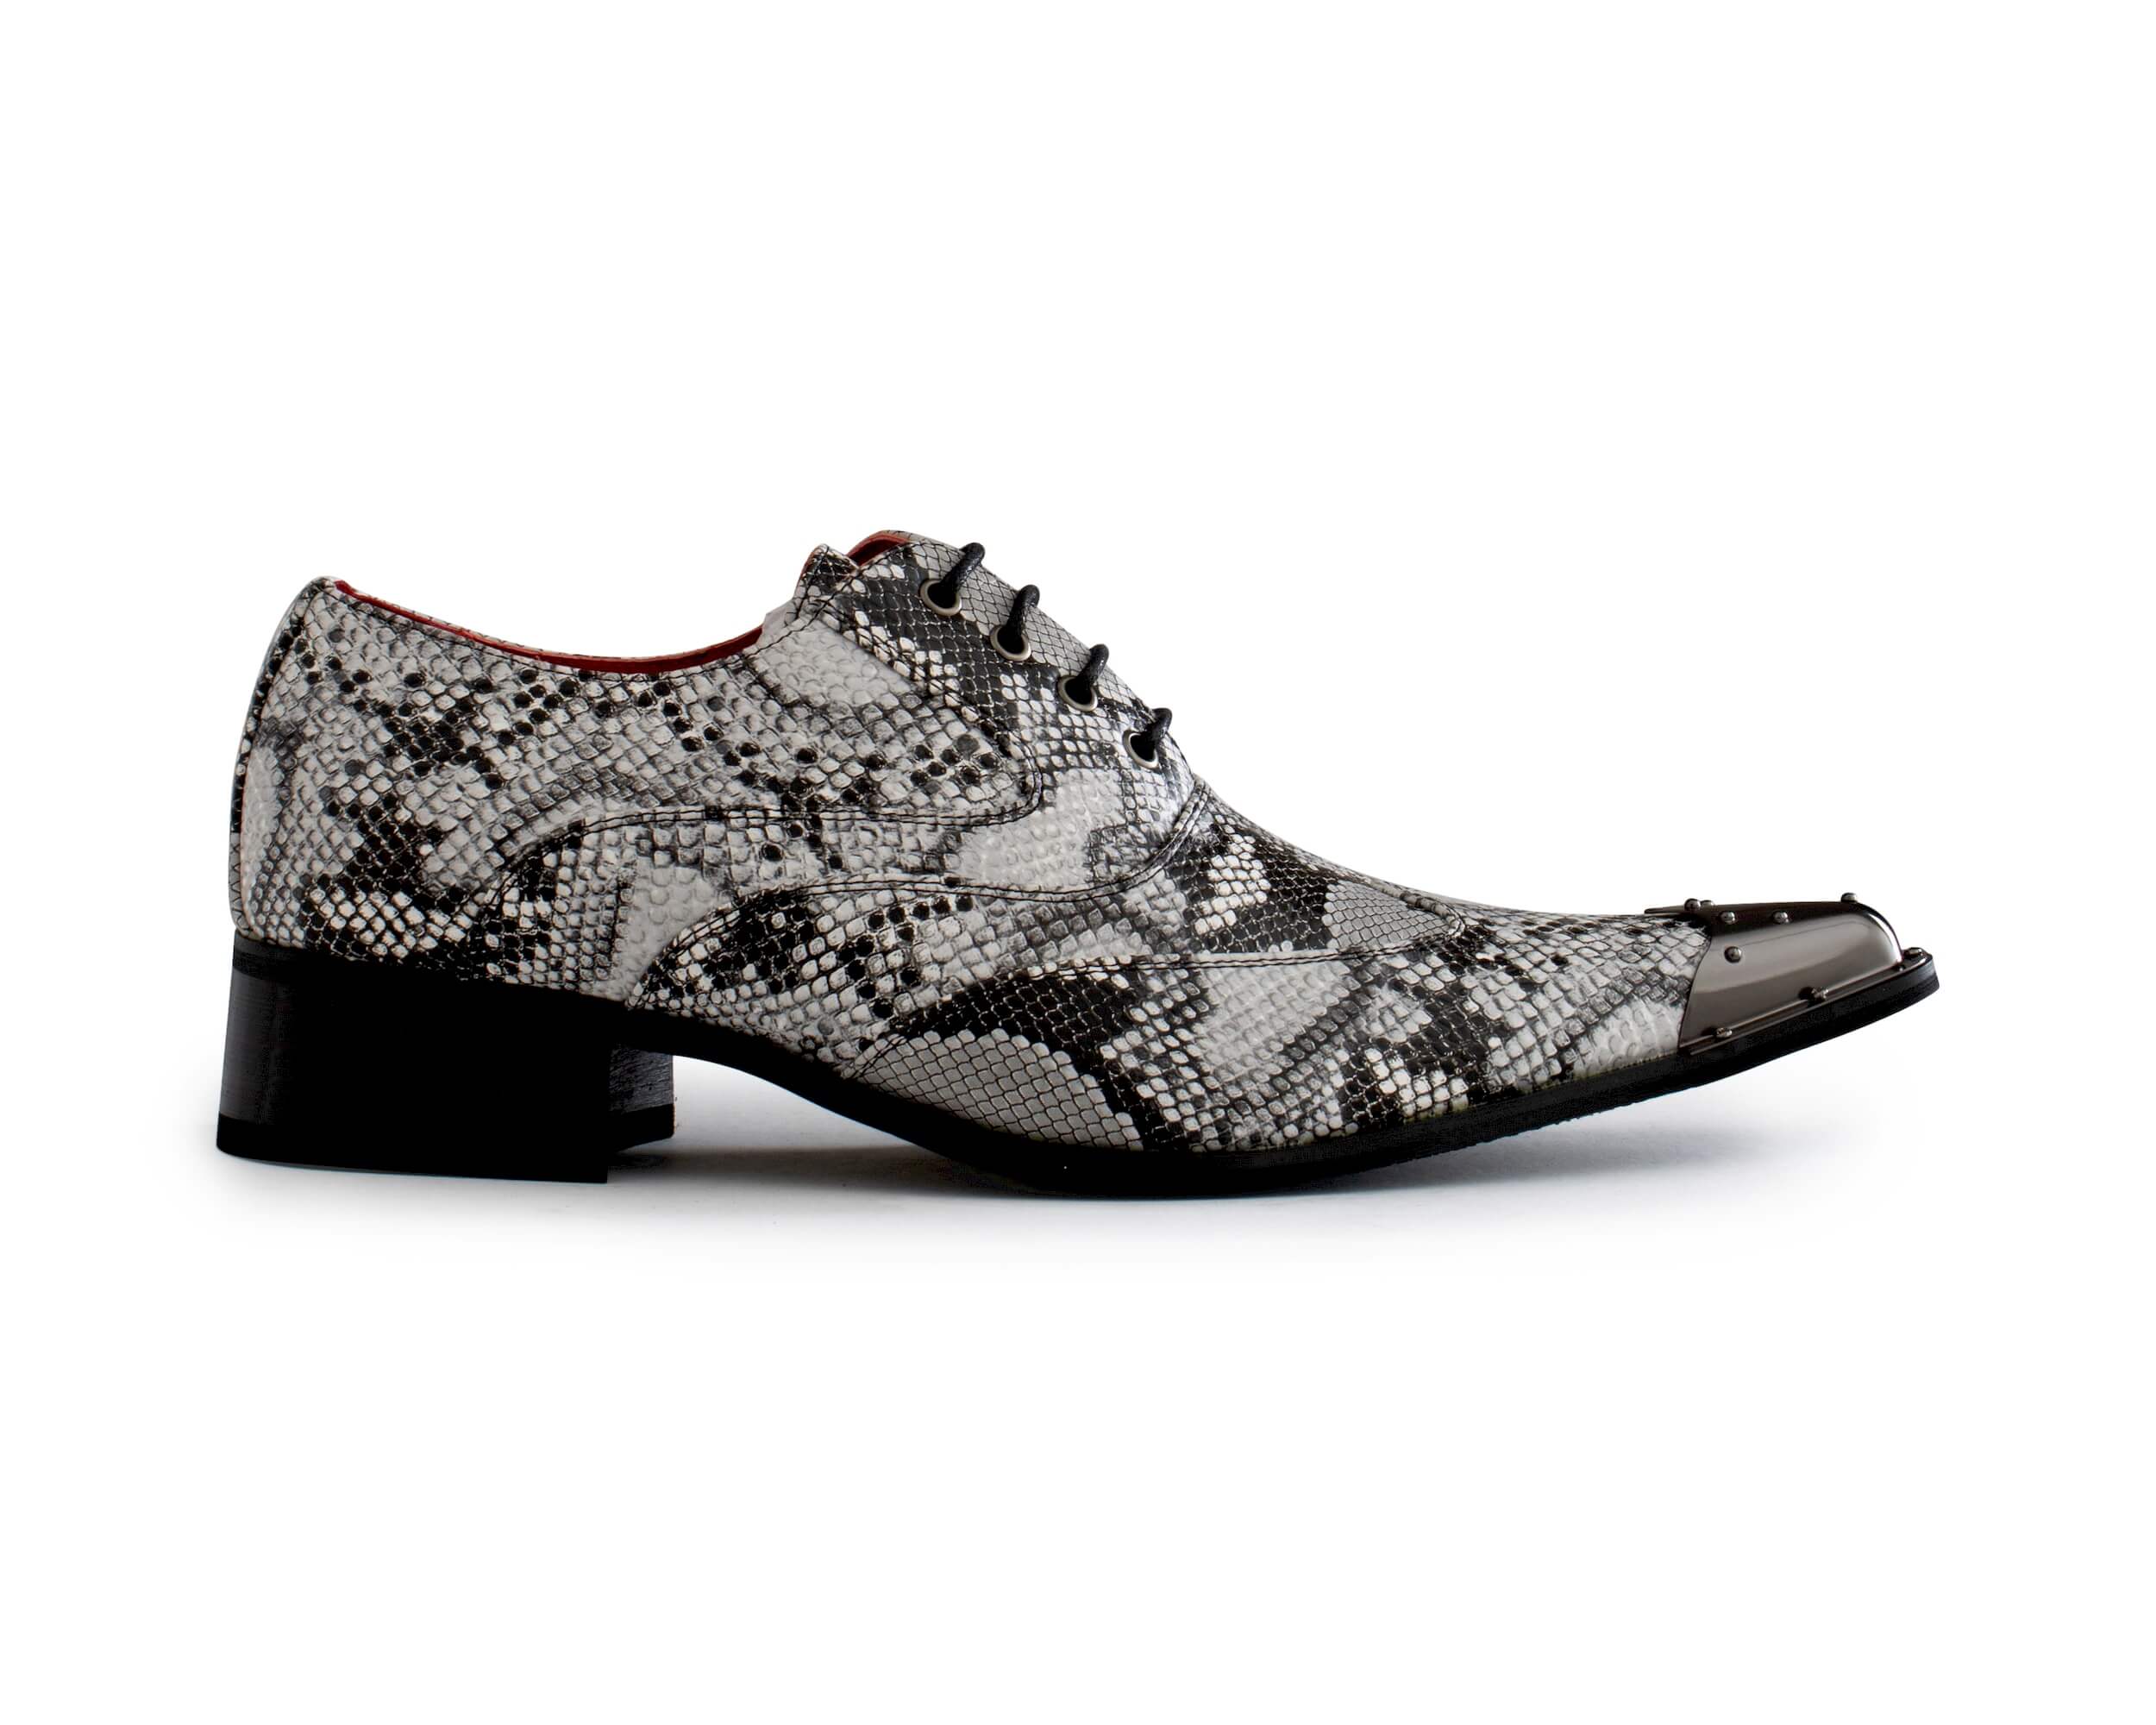 Mens Metal Pointed Metal Toe Patent Leather Dress Formal Shoes Snakeskin  Pattern